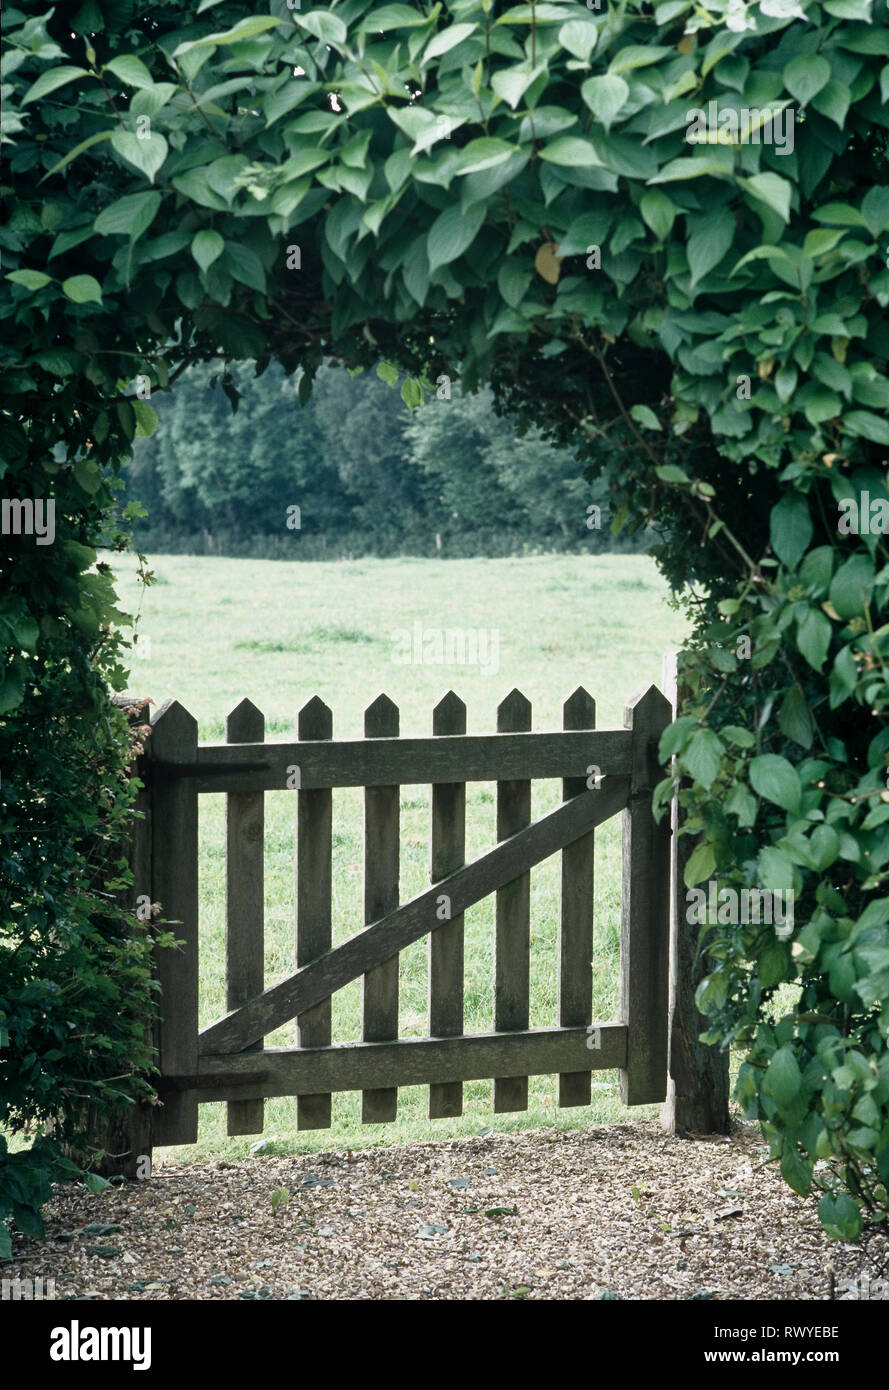 Closed wooden gate under hedge Stock Photo